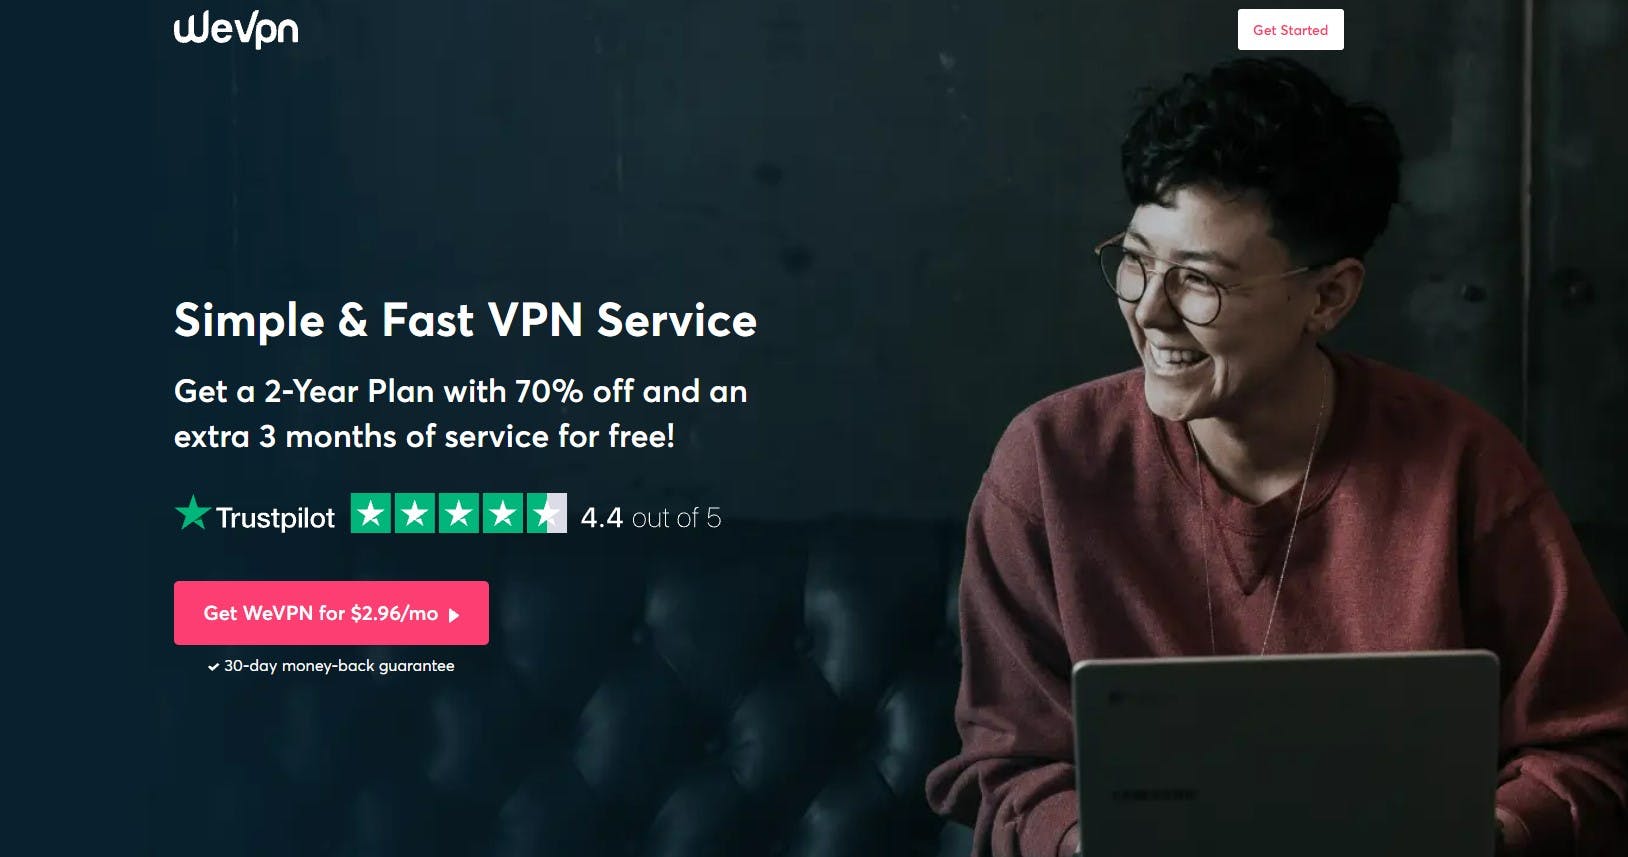 WeVPN - What You Need to Know Before Choosing It